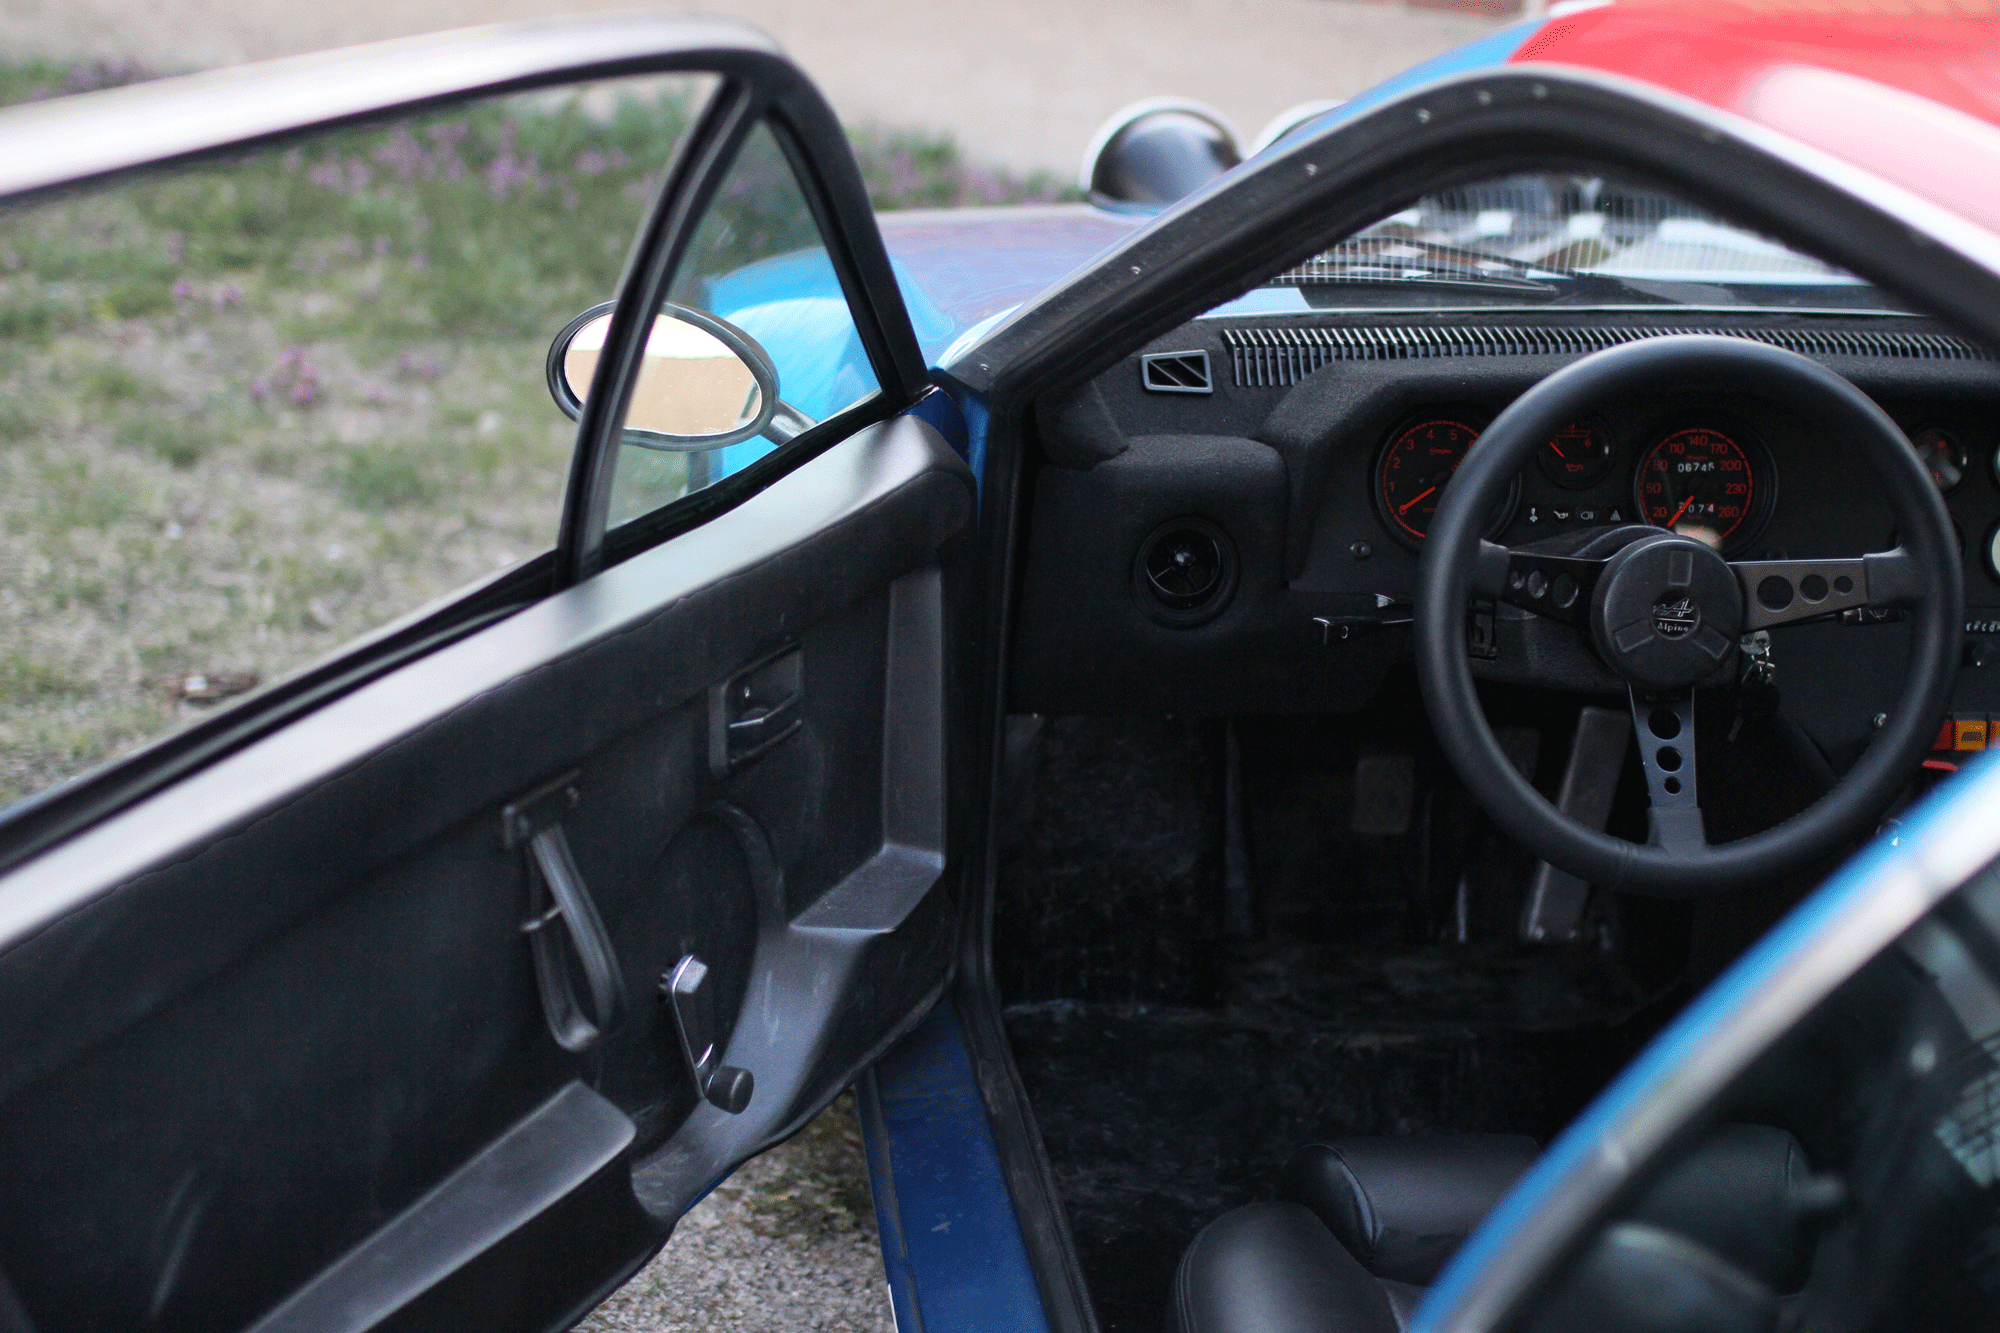 The interior in the Renault Alpine A310 with a window crank